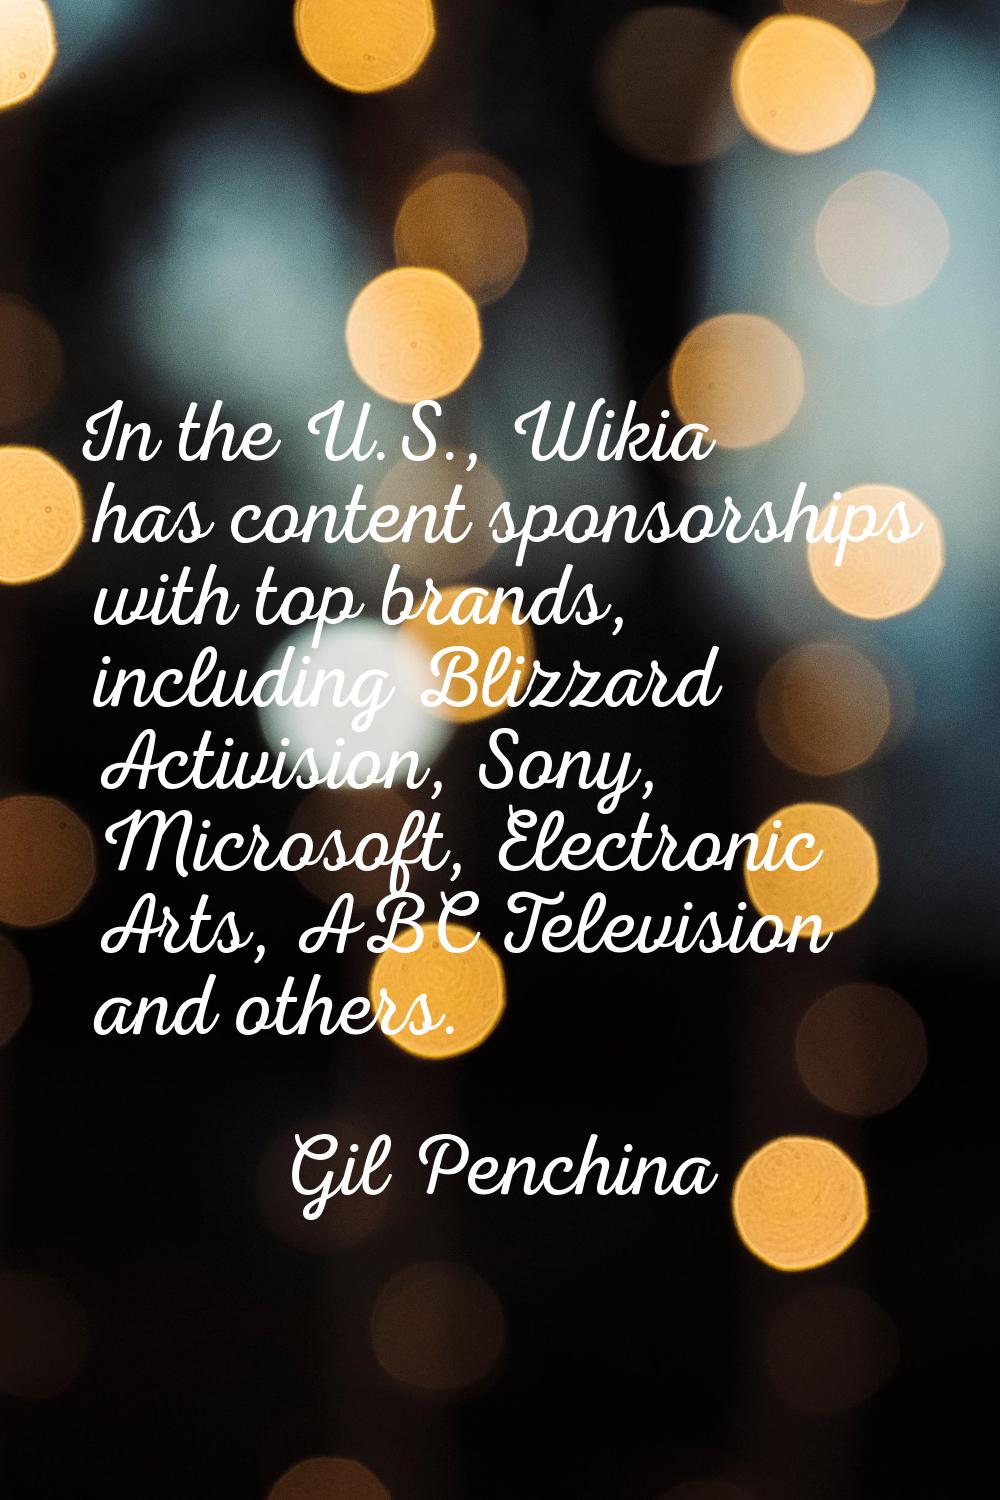 In the U.S., Wikia has content sponsorships with top brands, including Blizzard Activision, Sony, M